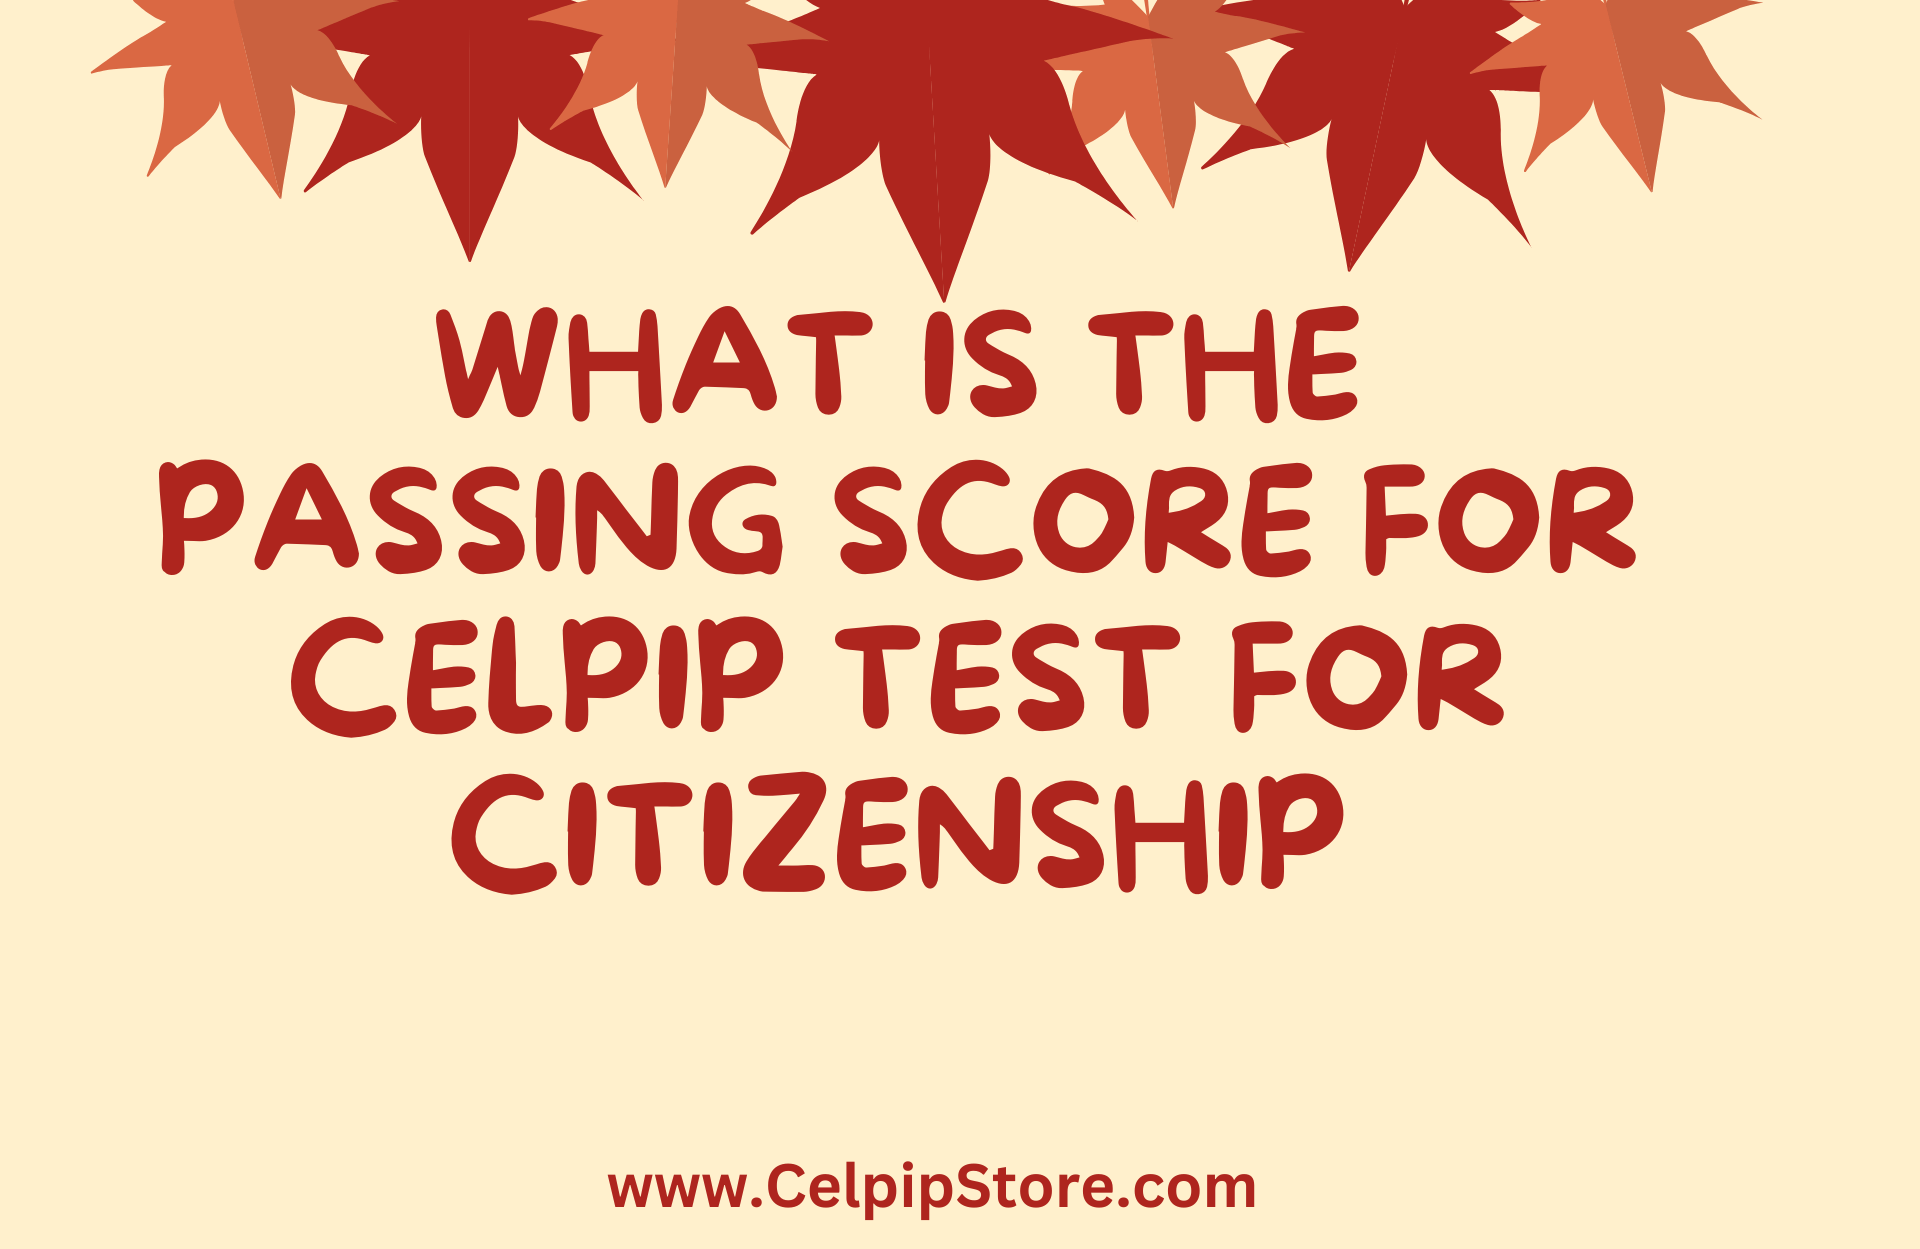 What Is The Passing Score For CELPIP Test For Citizenship